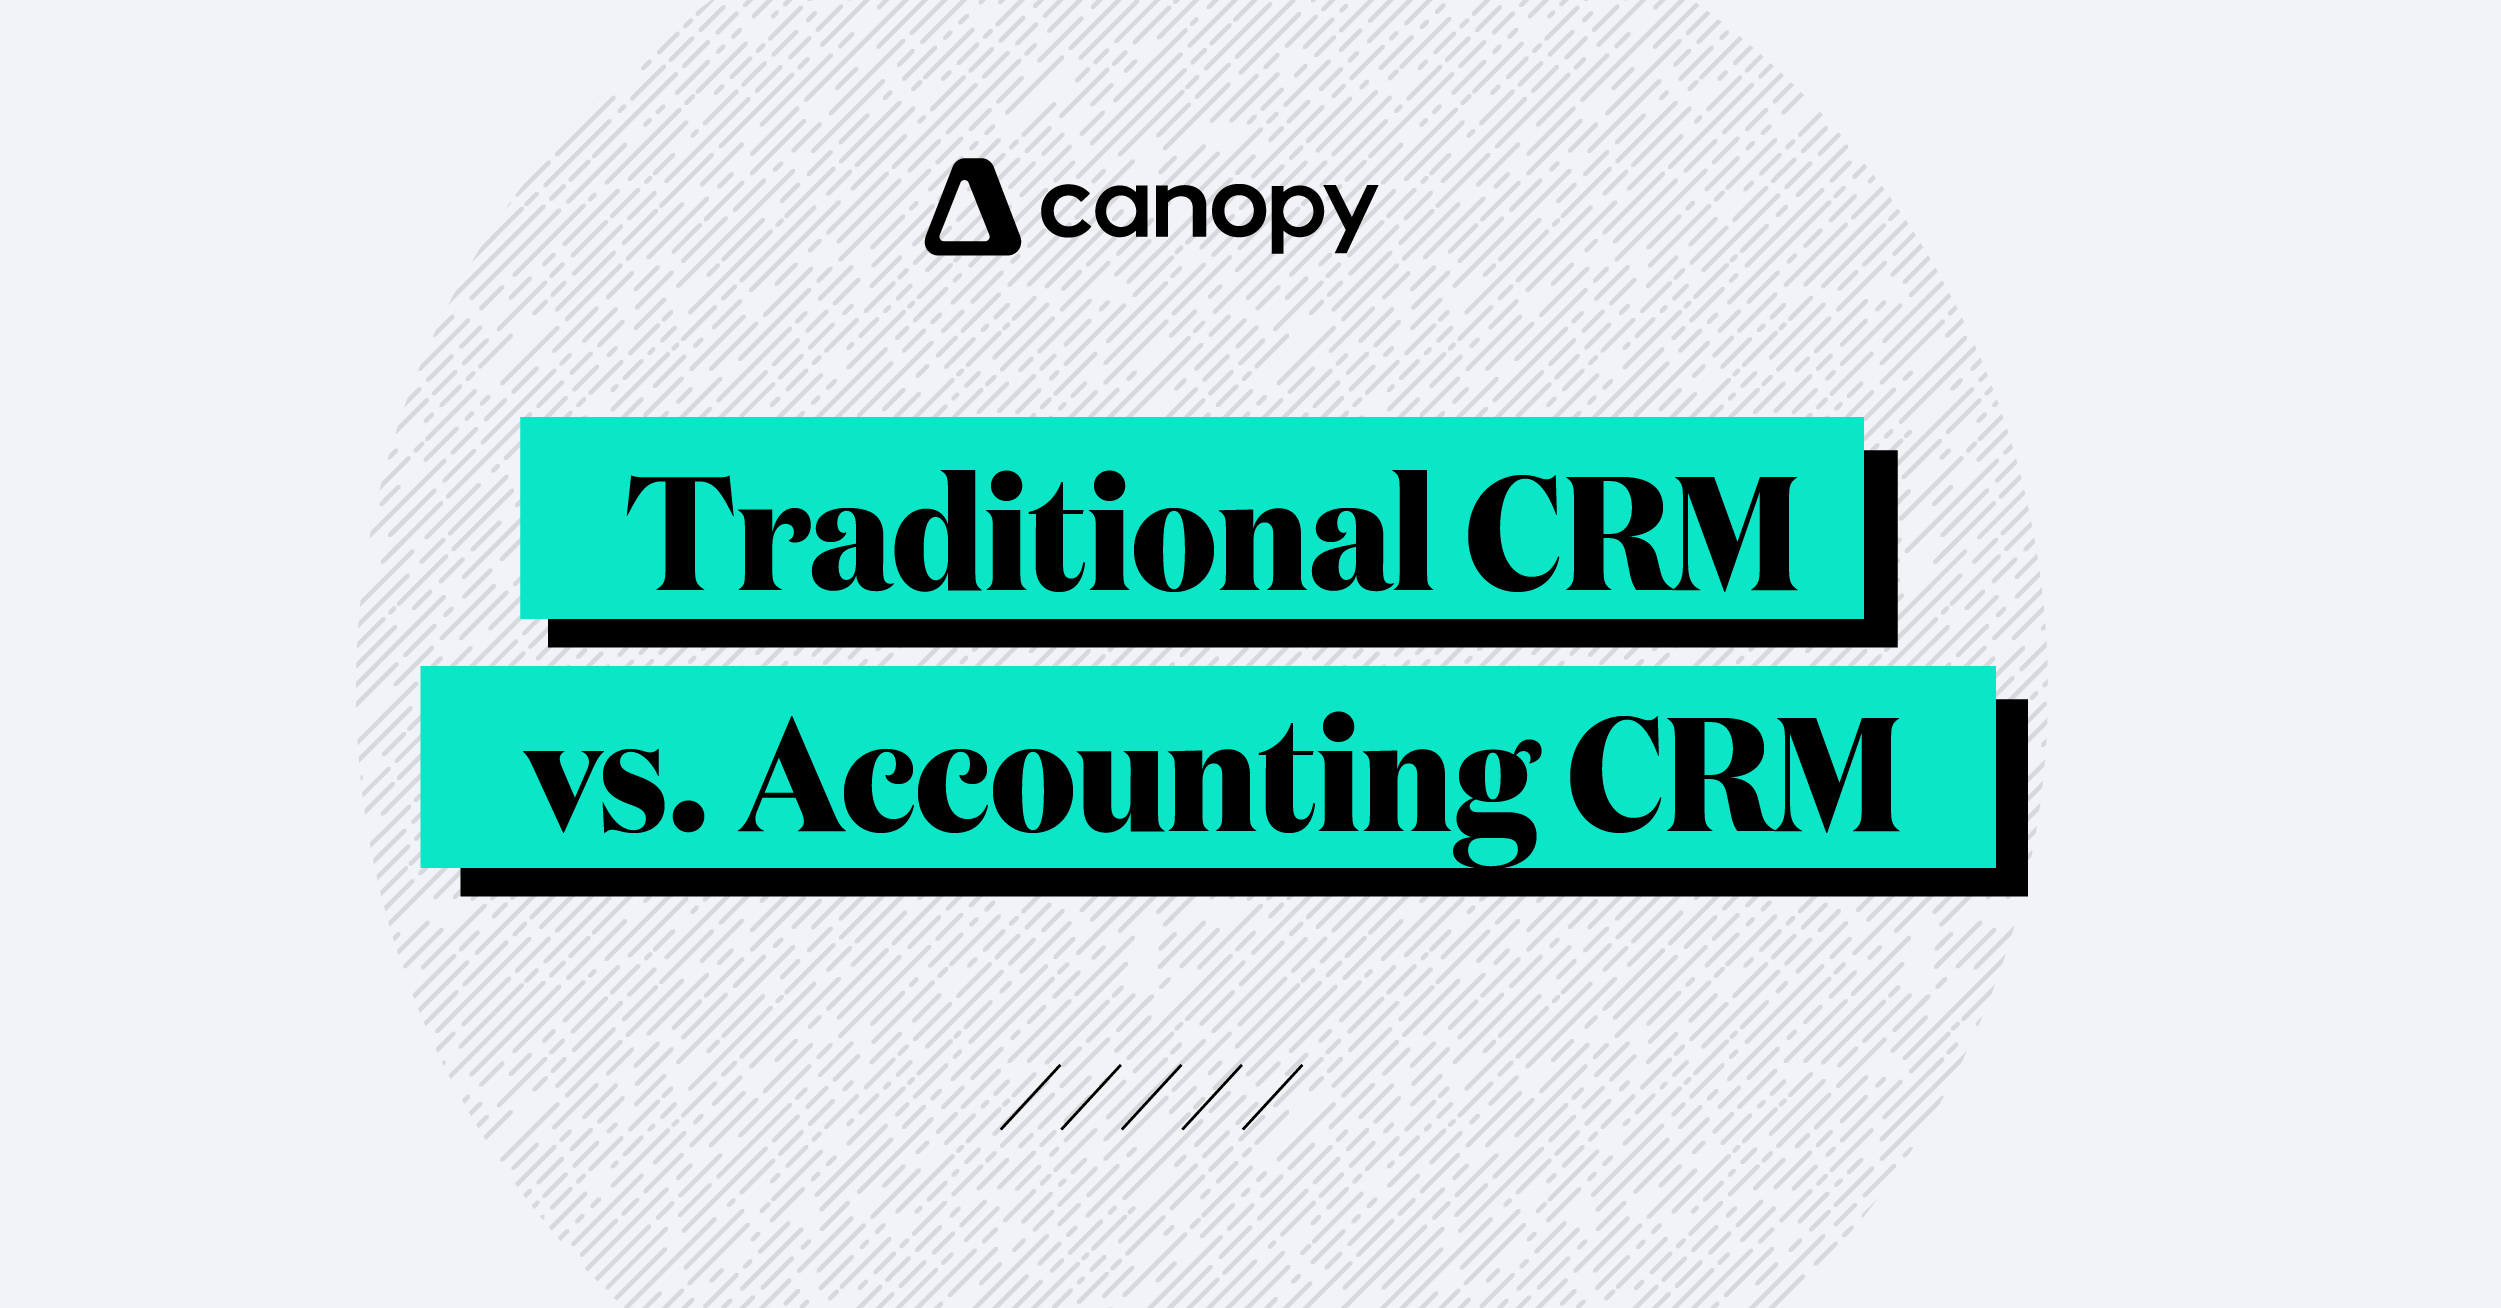 Traditional CRM vs. Accounting CRM